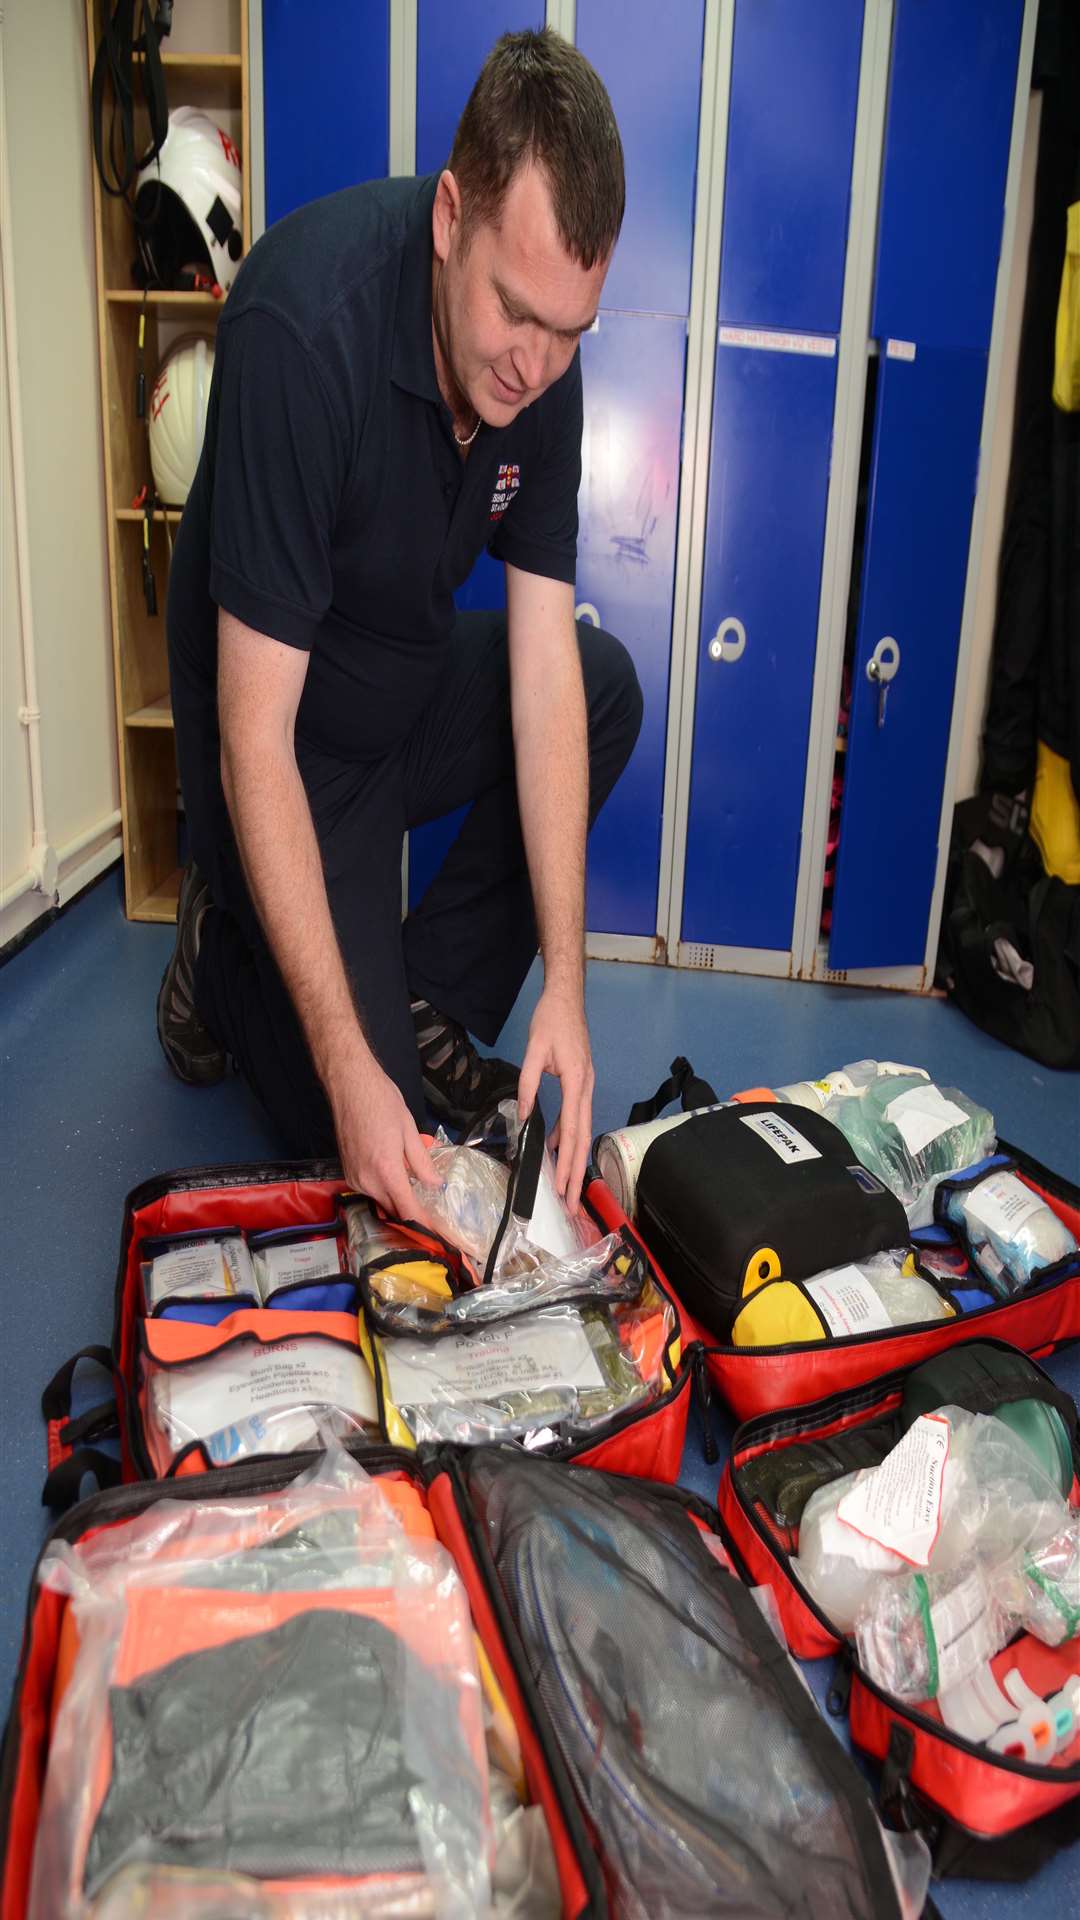 Volunteer Stewart Challis checking the Casualty Care Kit